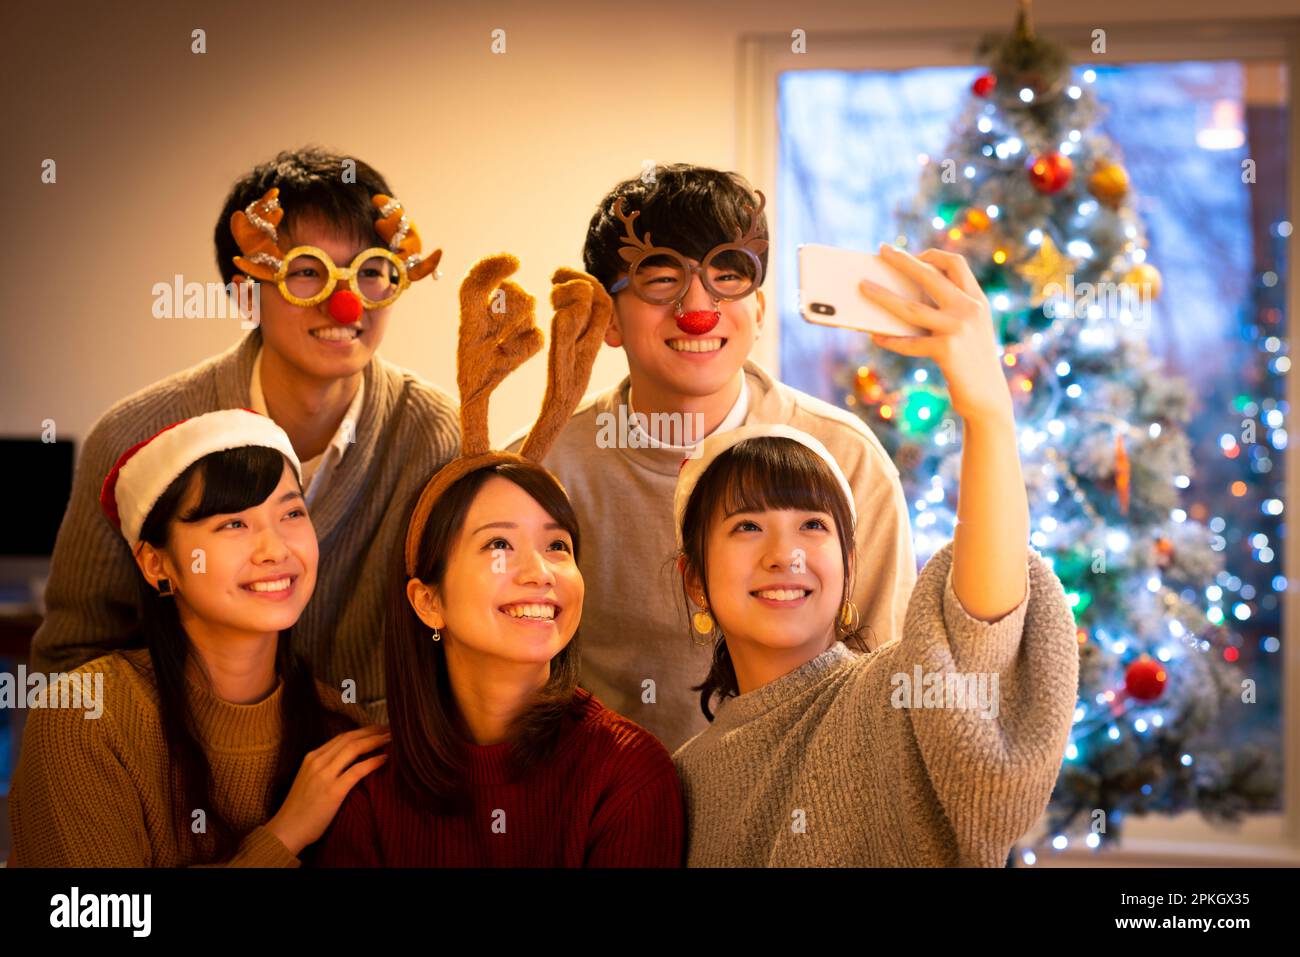 Young people taking a picture at a Christmas party Stock Photo